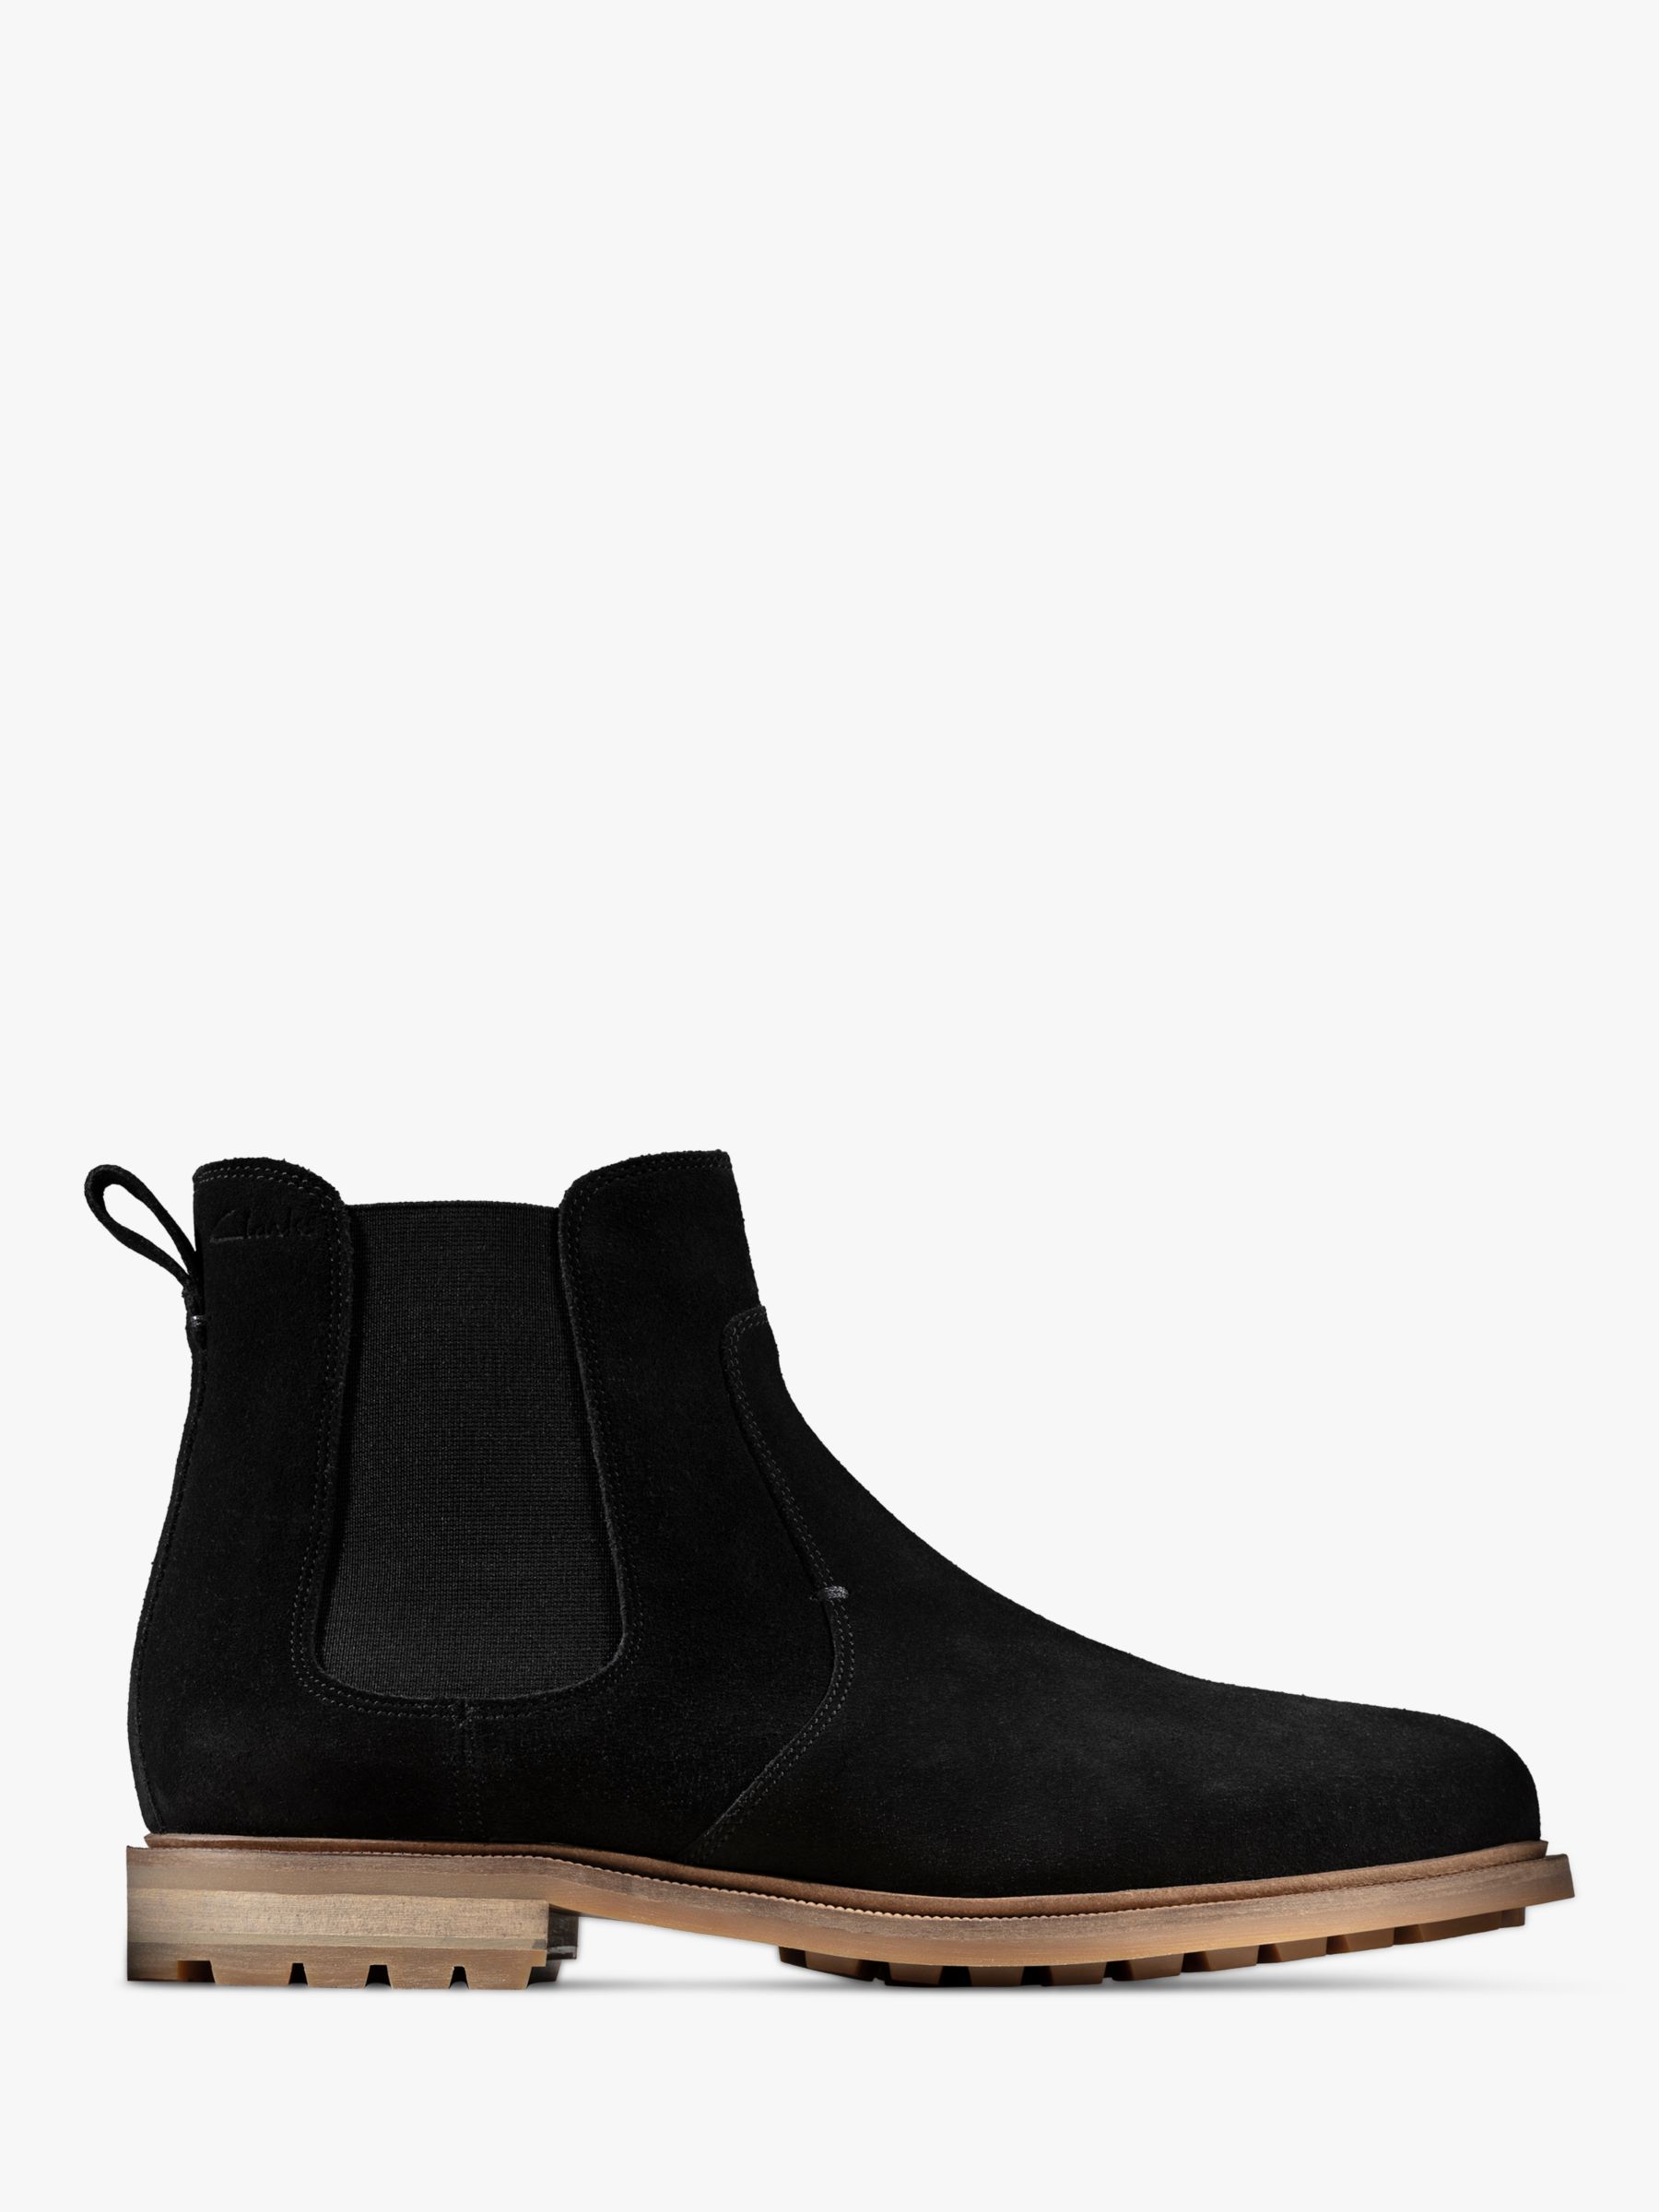 Clarks Foxwell Suede Chelsea Boots